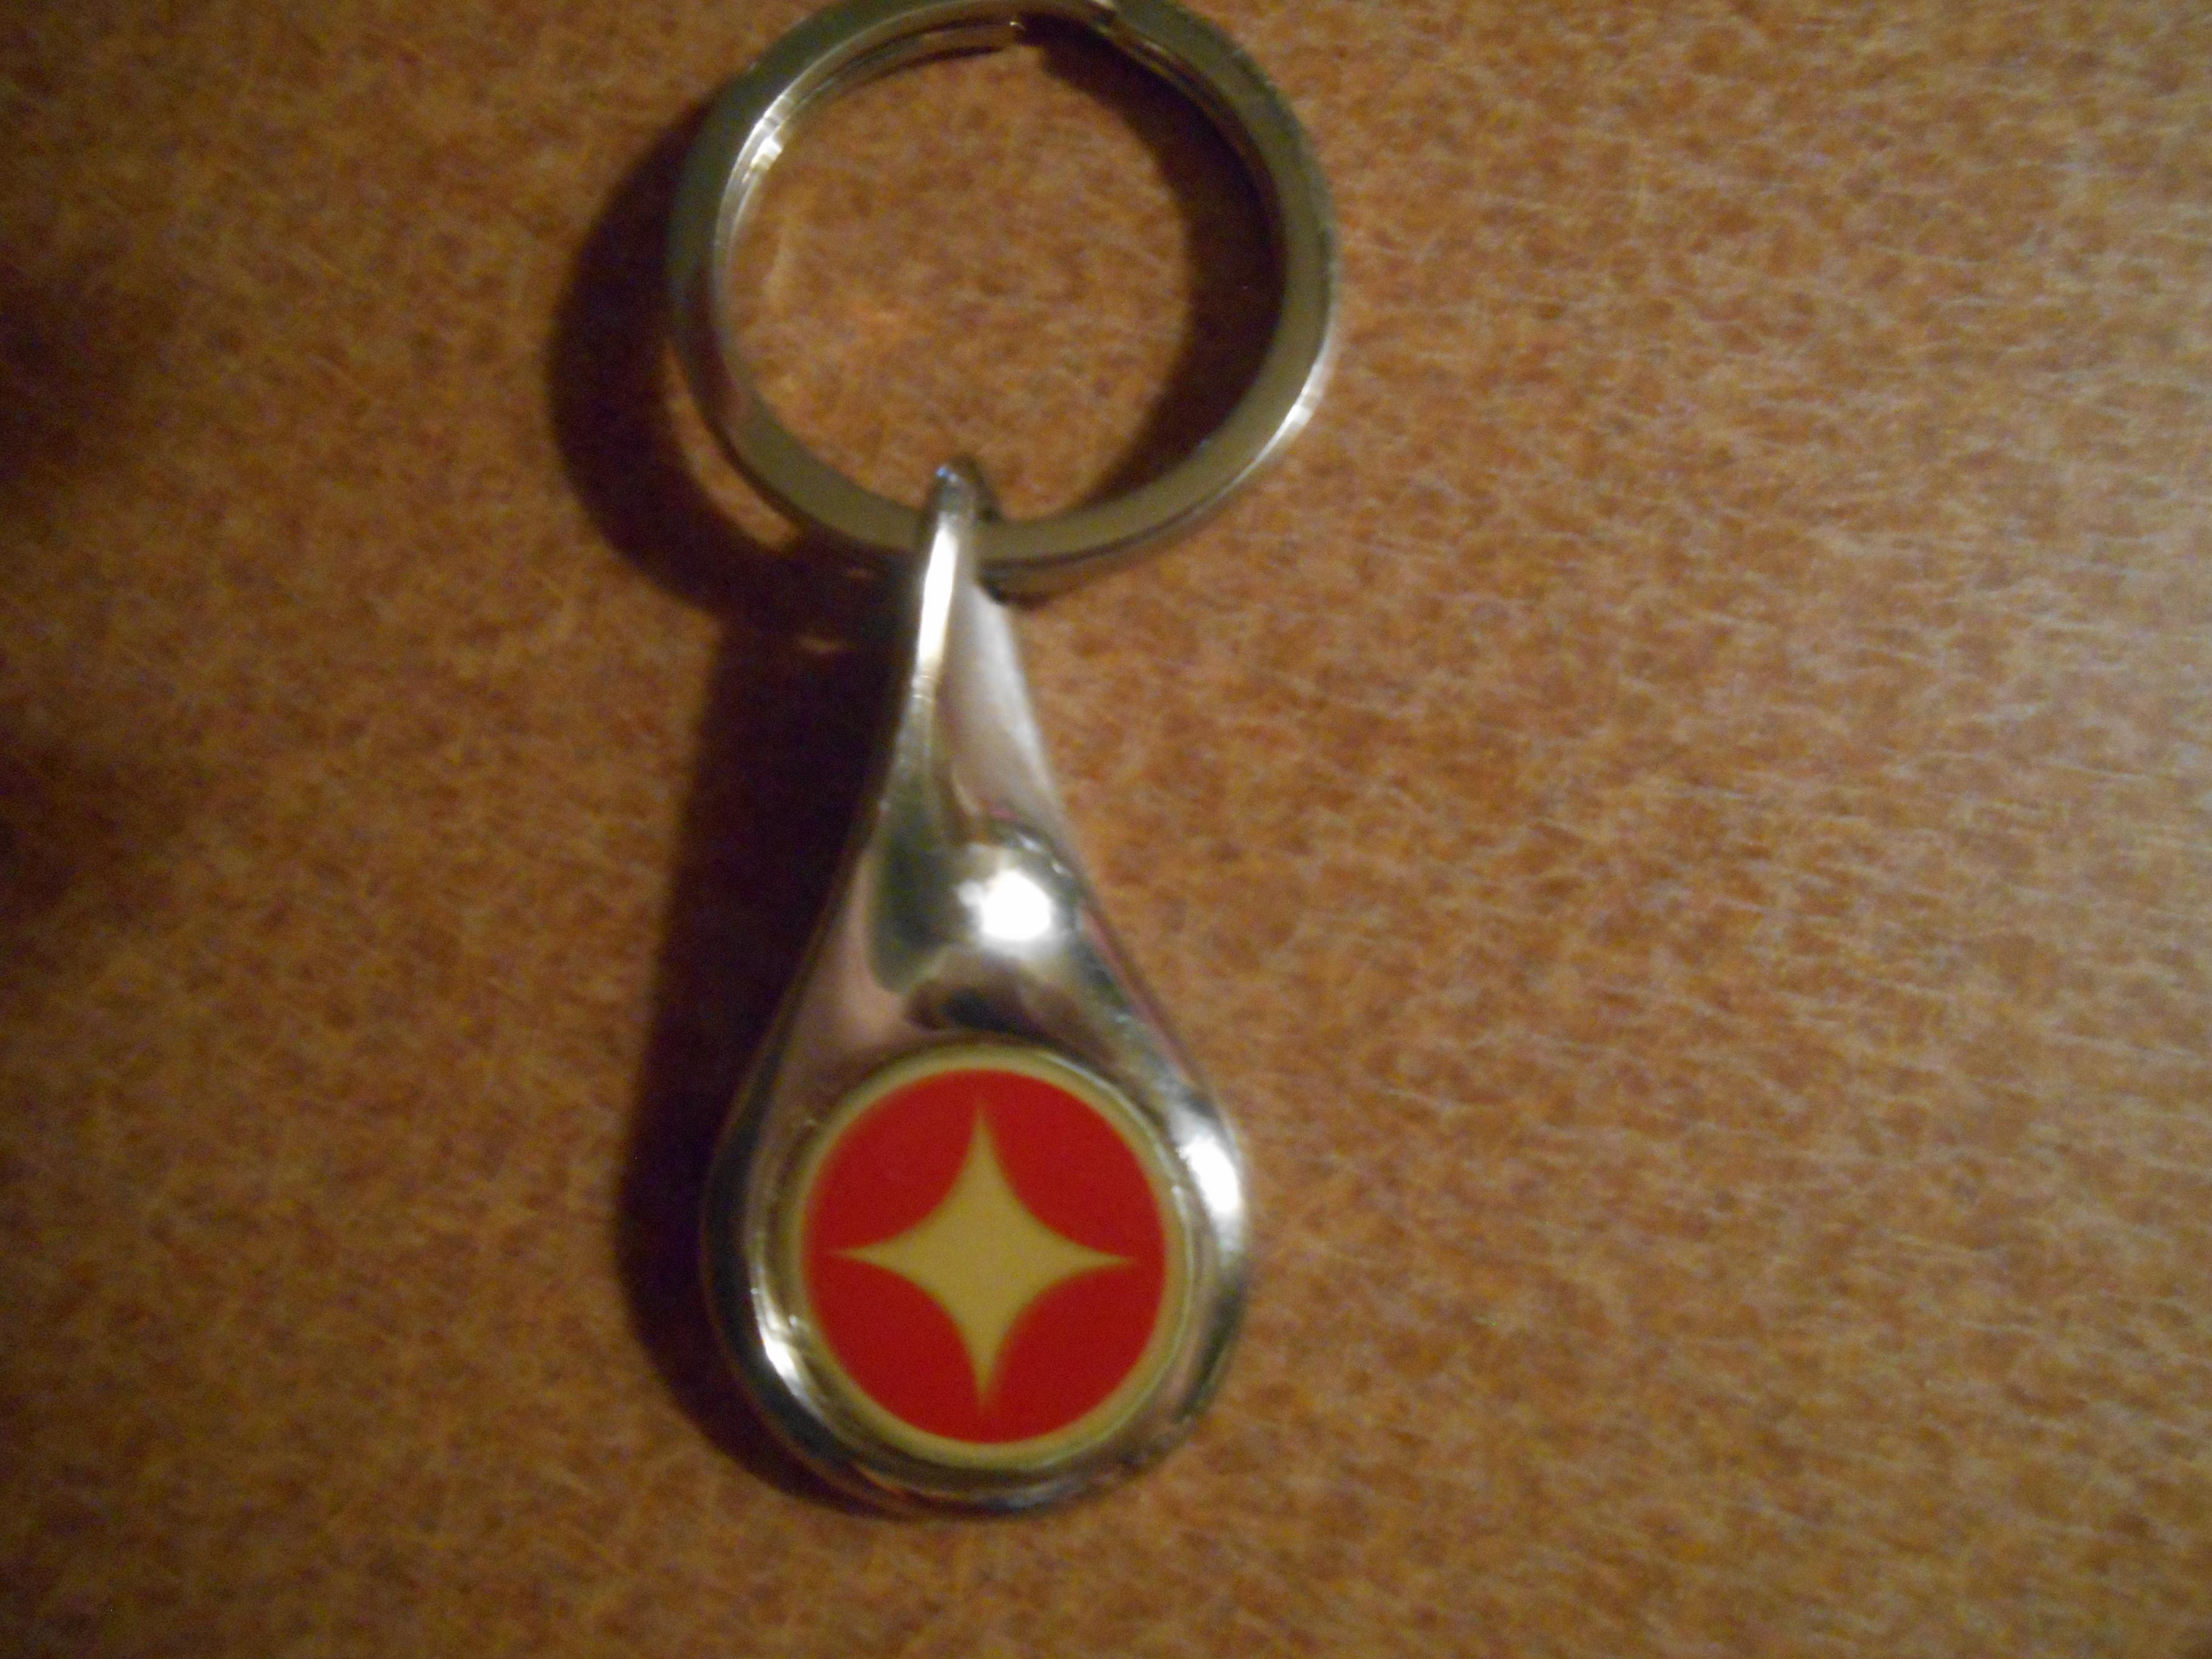 White with Red Tear Drop Logo - Mighty Redditors! Please help identifying this keychain logo ...